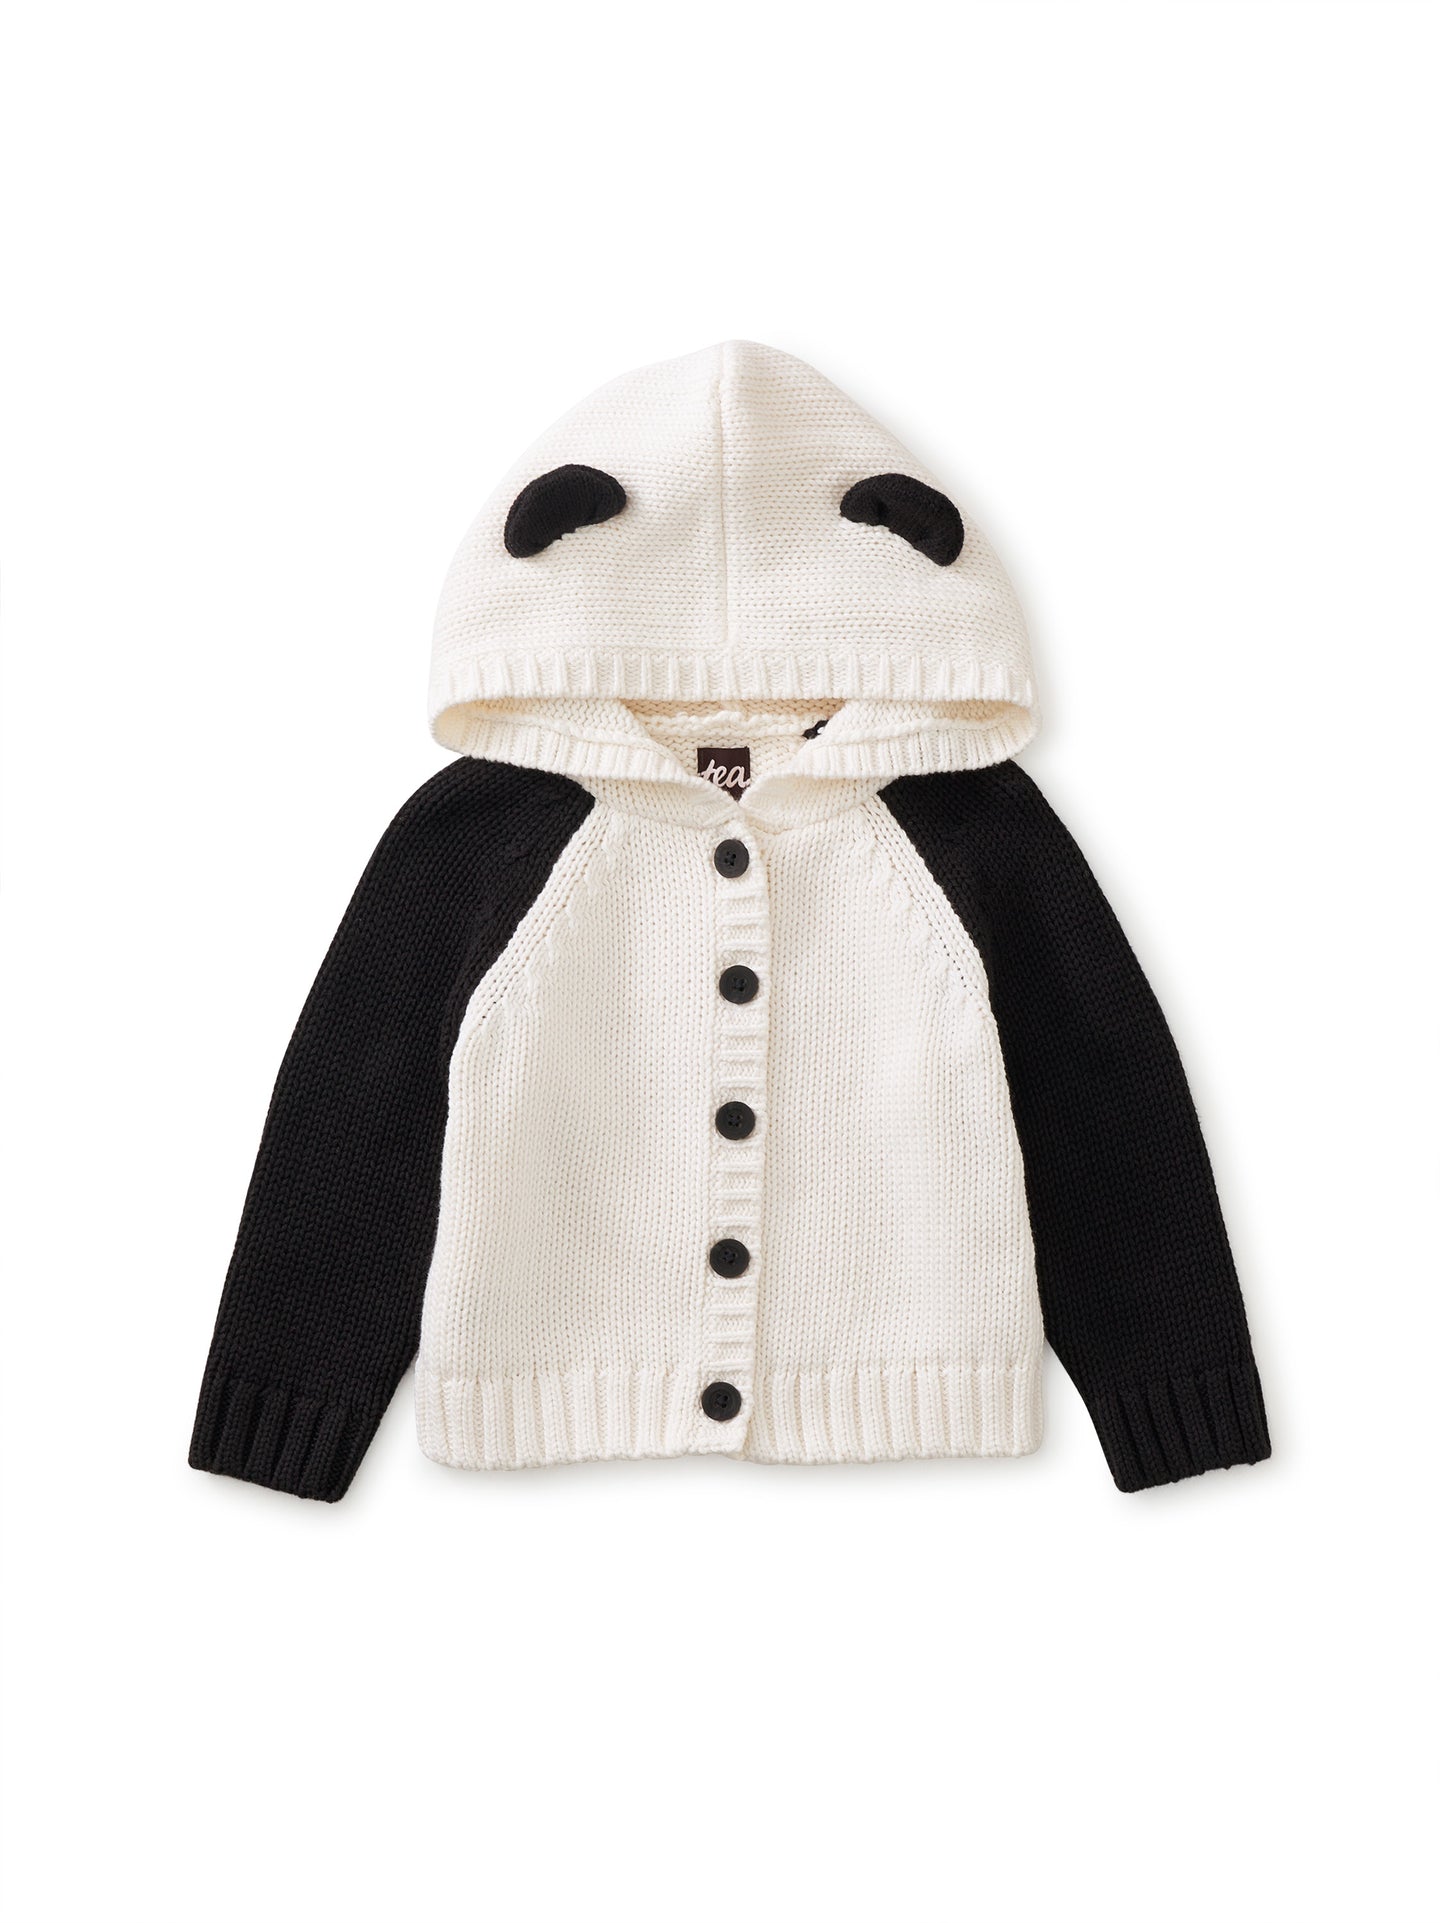 Tea Collection - Panda Hooded Baby Sweater